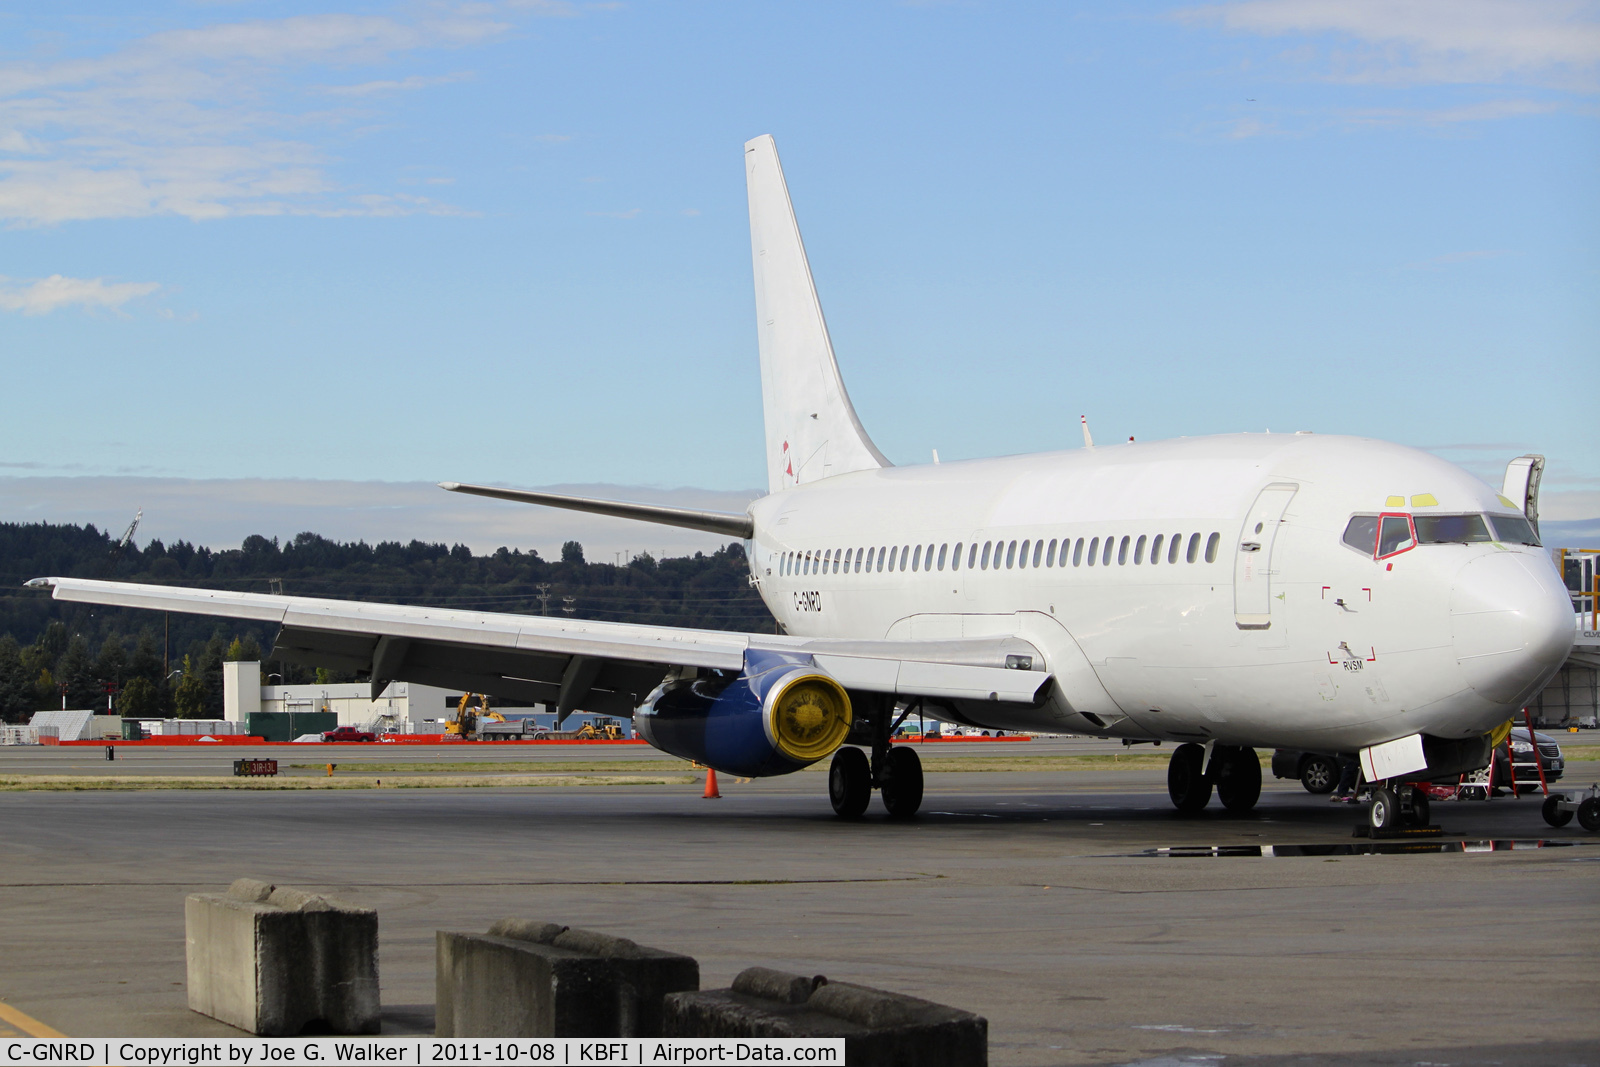 C-GNRD, 1979 Boeing 737-229C C/N 21738, Seen on the cargo ramp at BFI is this 737-229C operated by Nolinor Aviation.